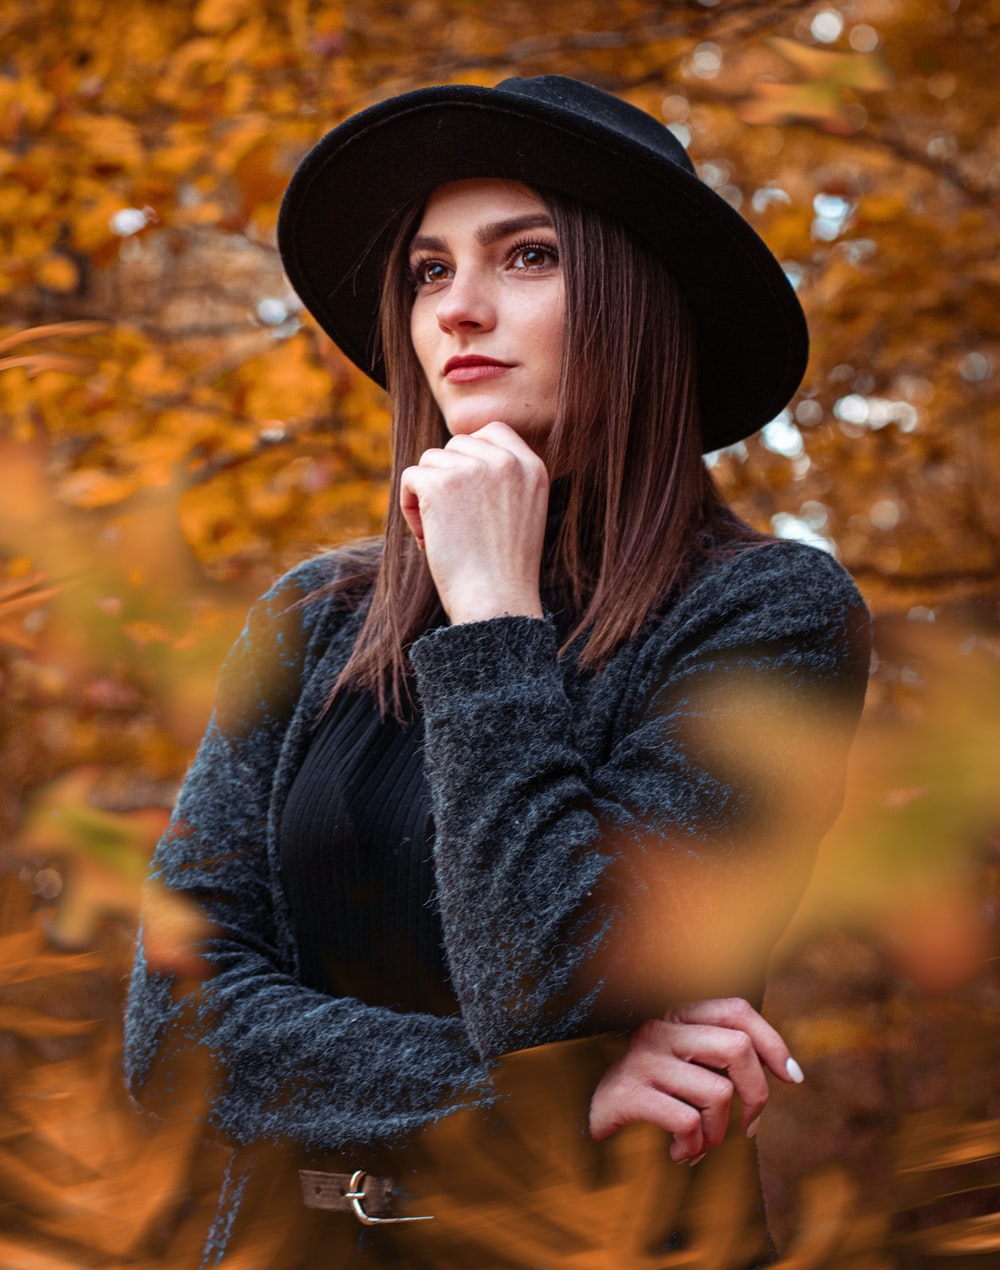 Girl With Hat Picture. Download Free Image